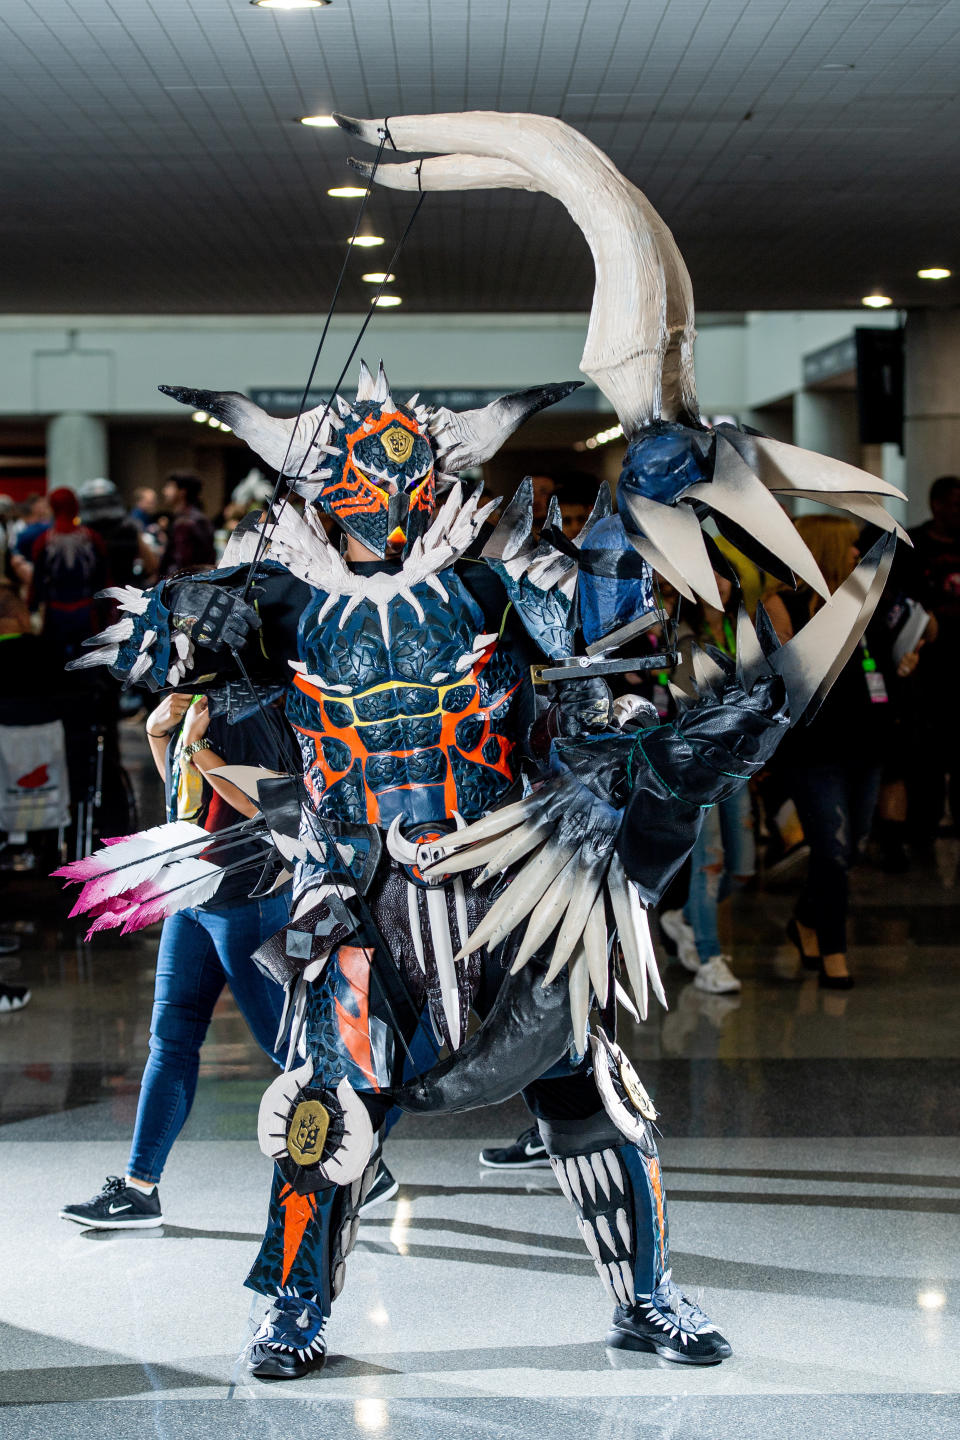 A cosplayer poses in elaborate costume.